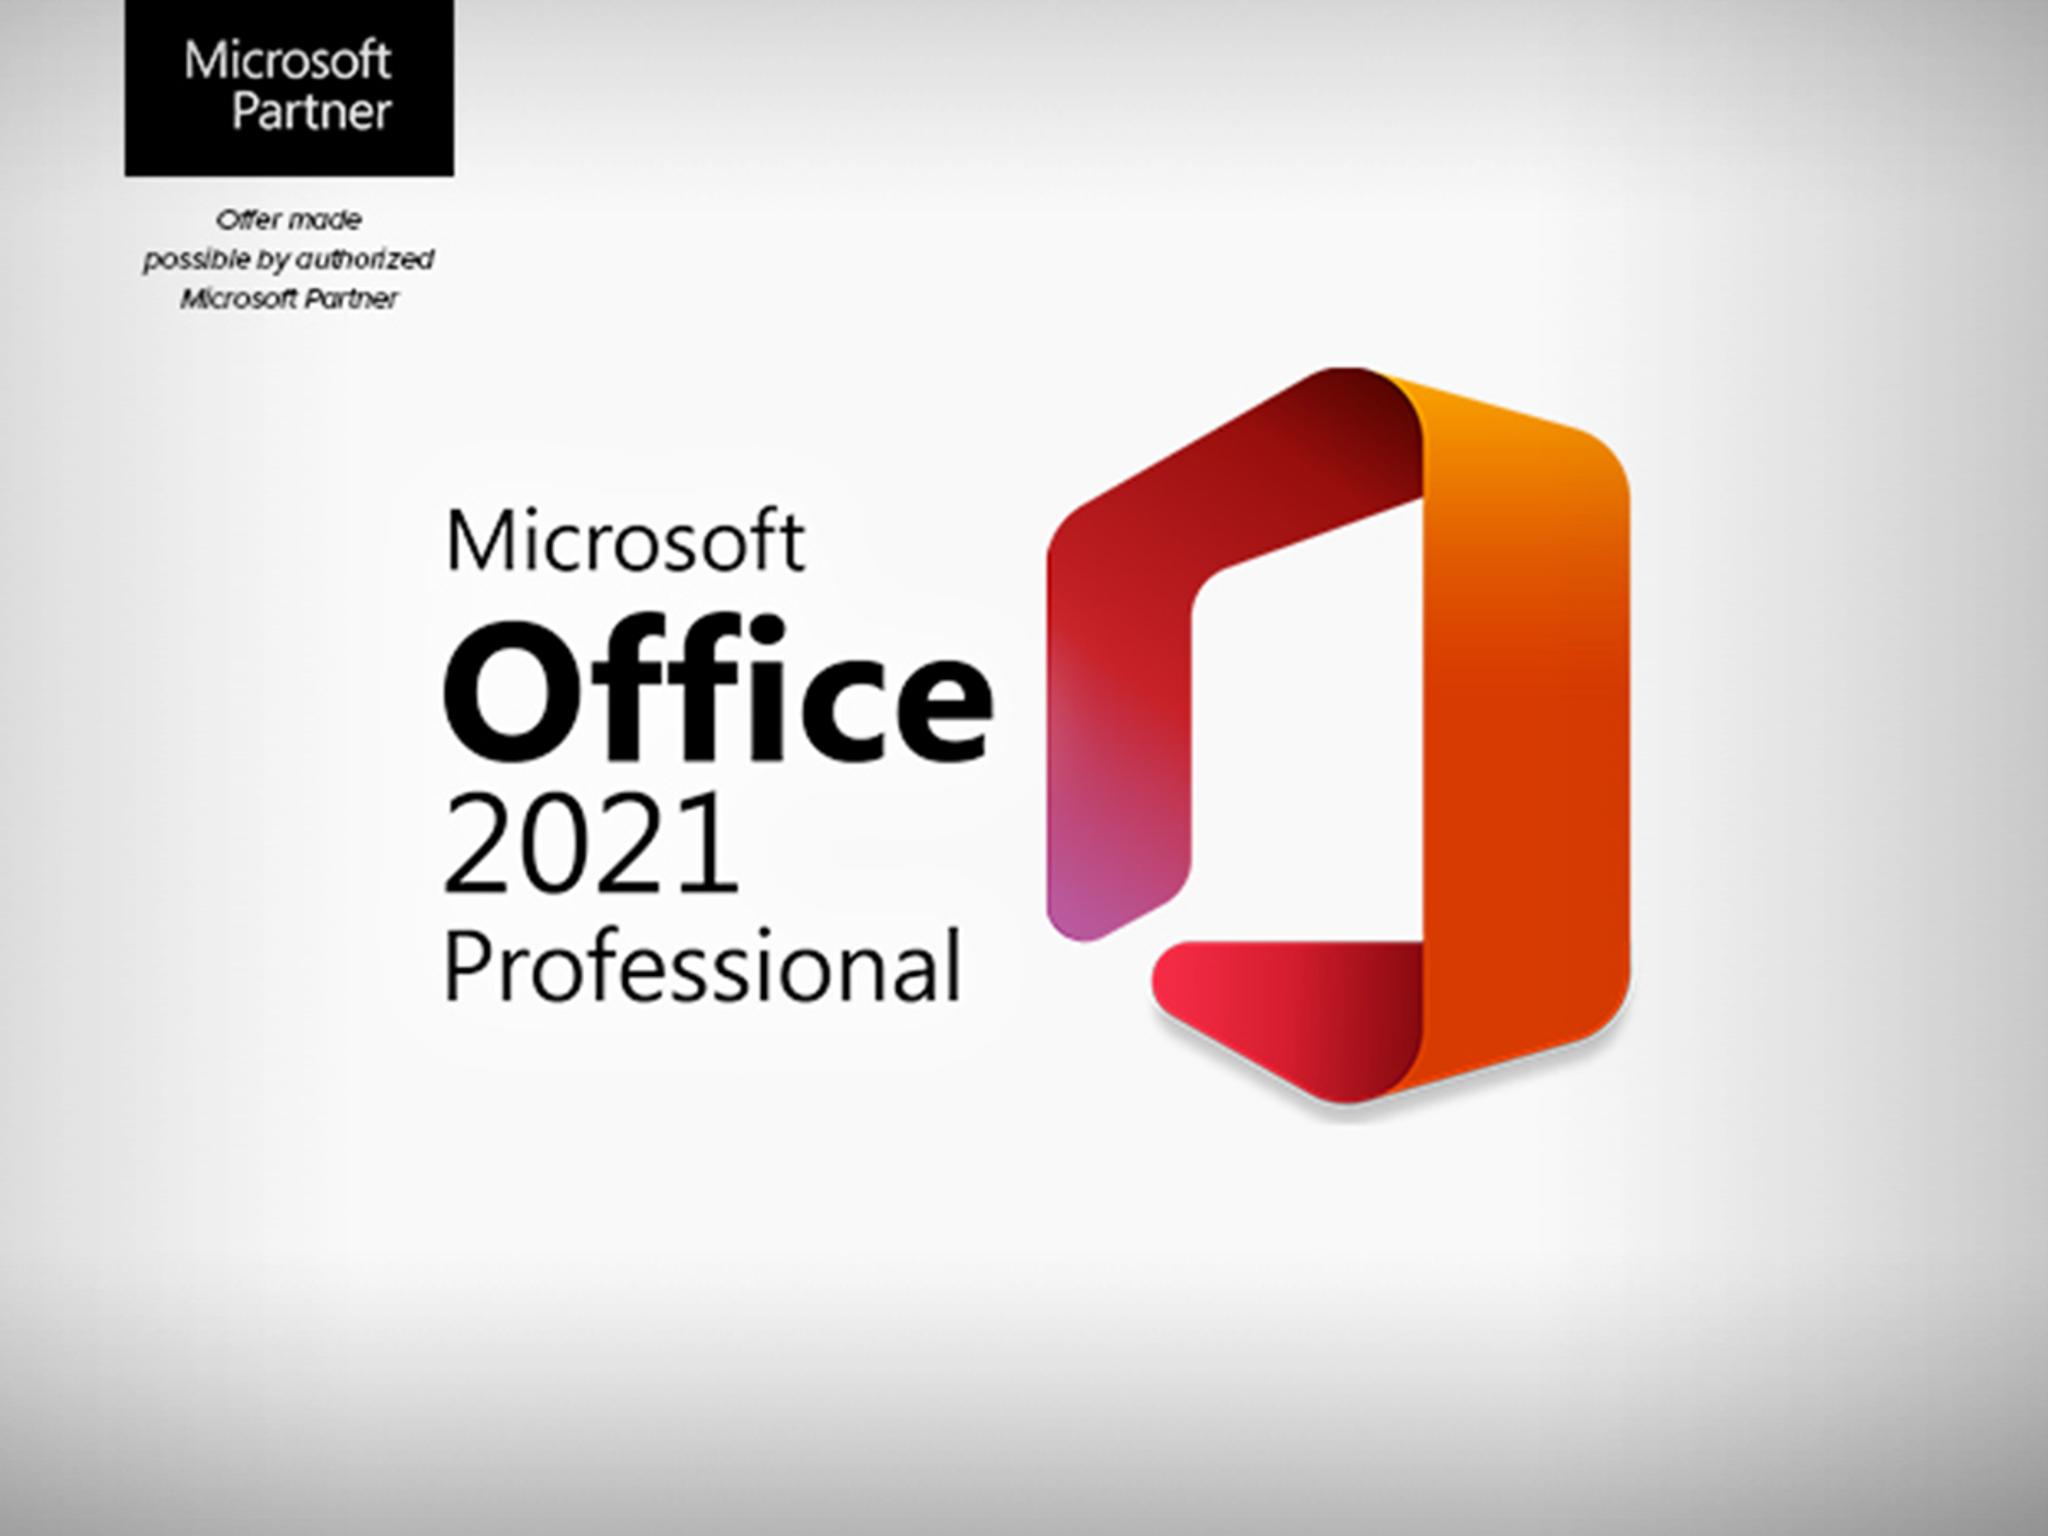 Get Microsoft Office Professional for Mac or PC for $70 right now